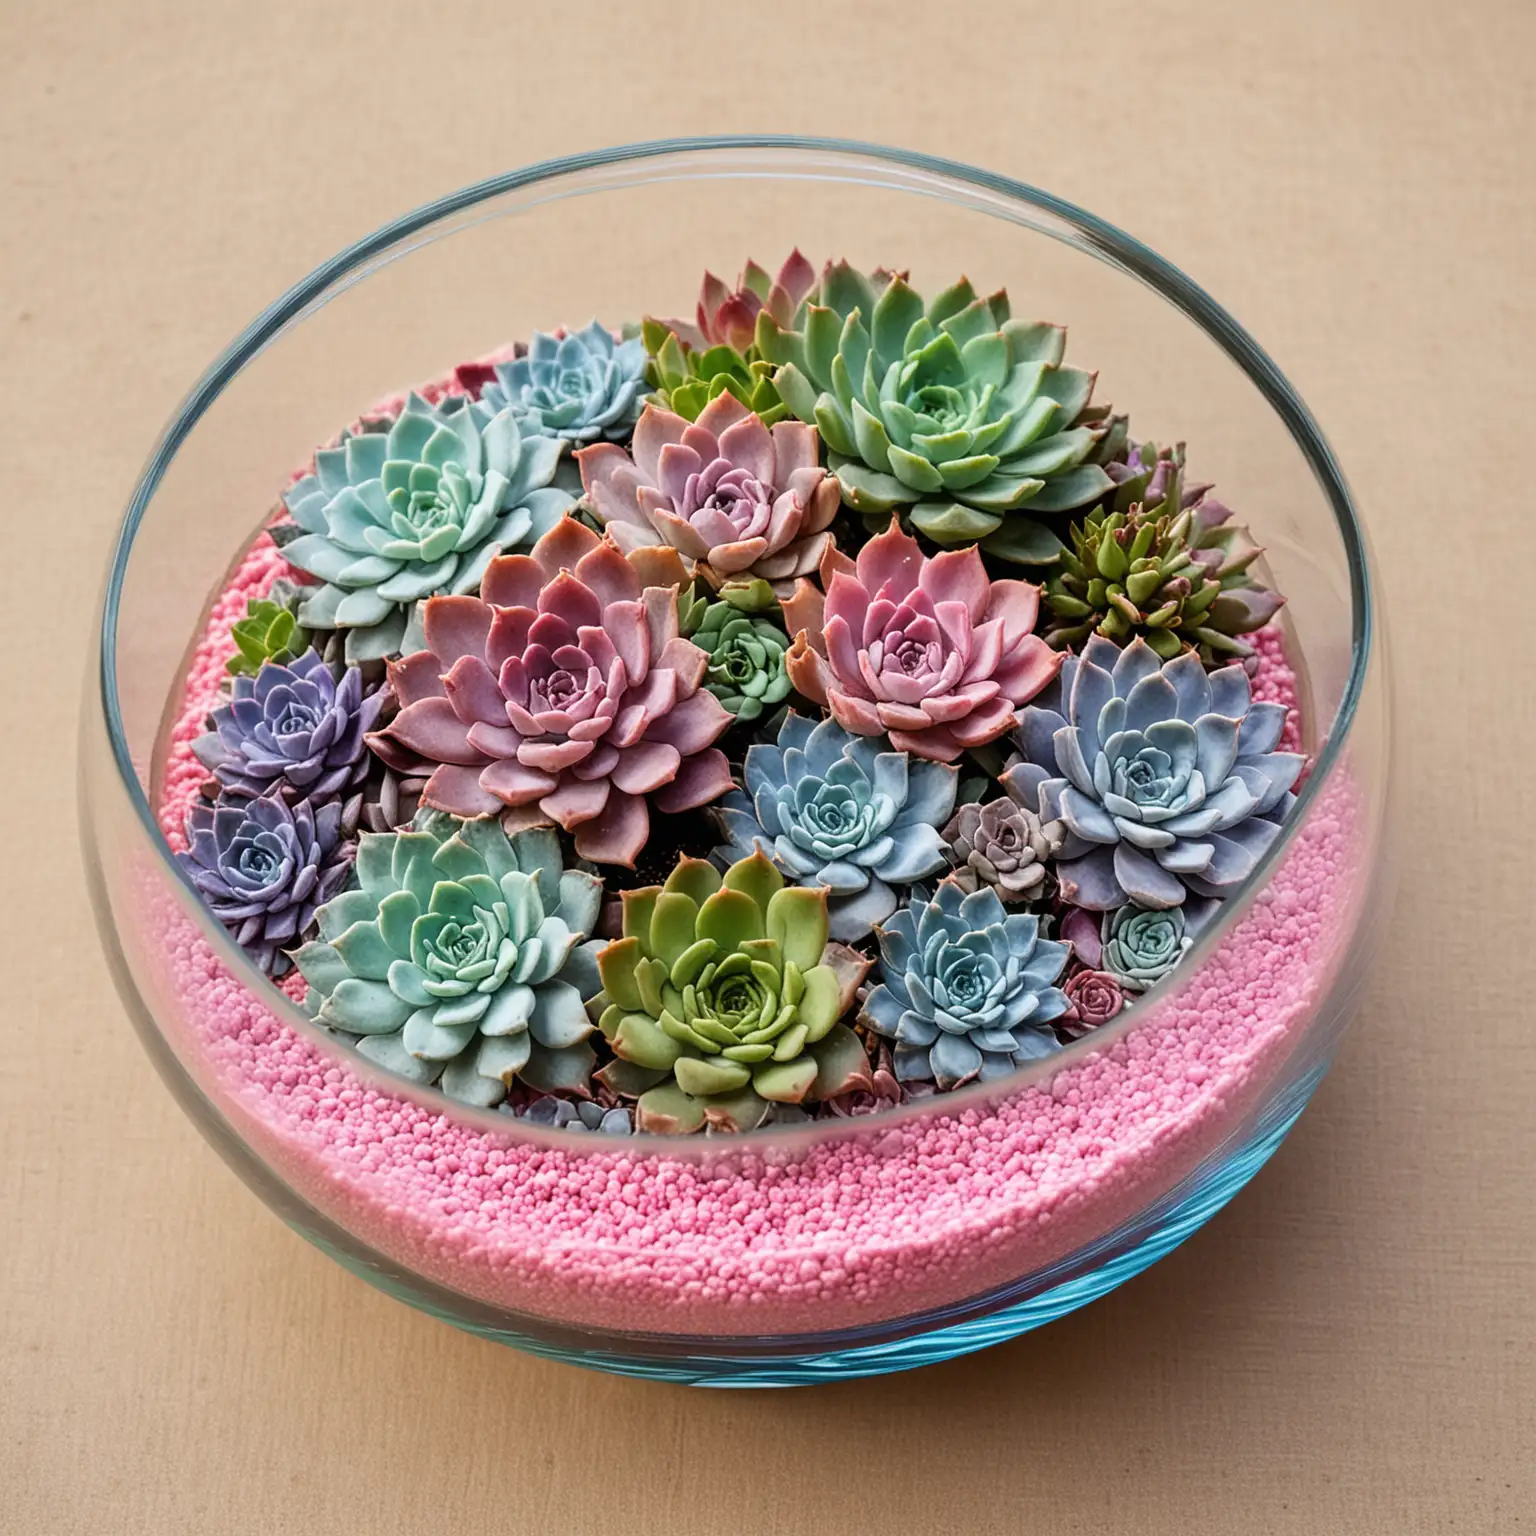 a succulent wedding centerpiece in a round  shallow disc shaped glass bowl vase with layers of bright colored sand in turquoise and purple and pink as the base